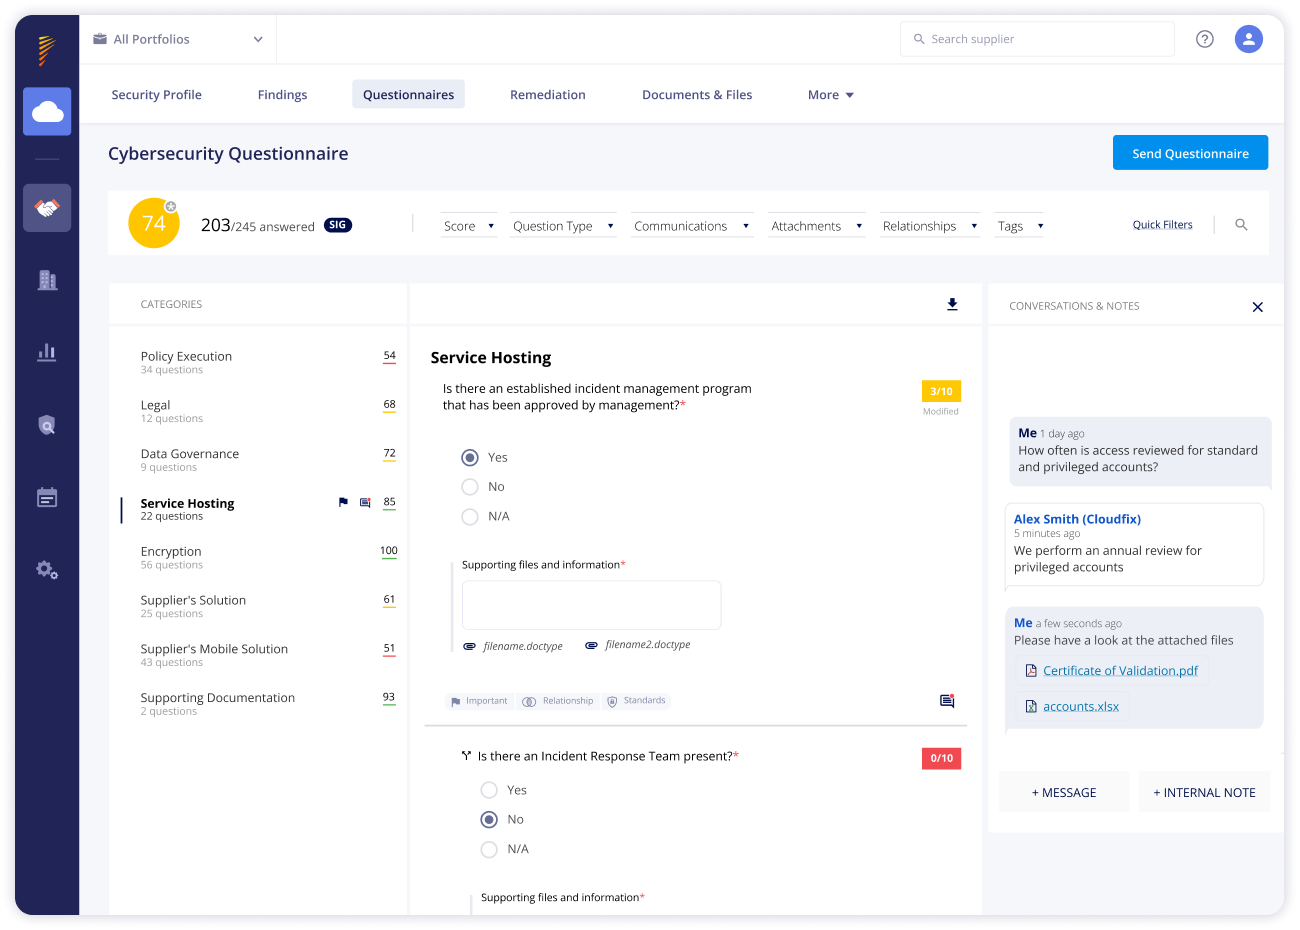 Panorays' Dashboard: Cybersecurity Questionnaires